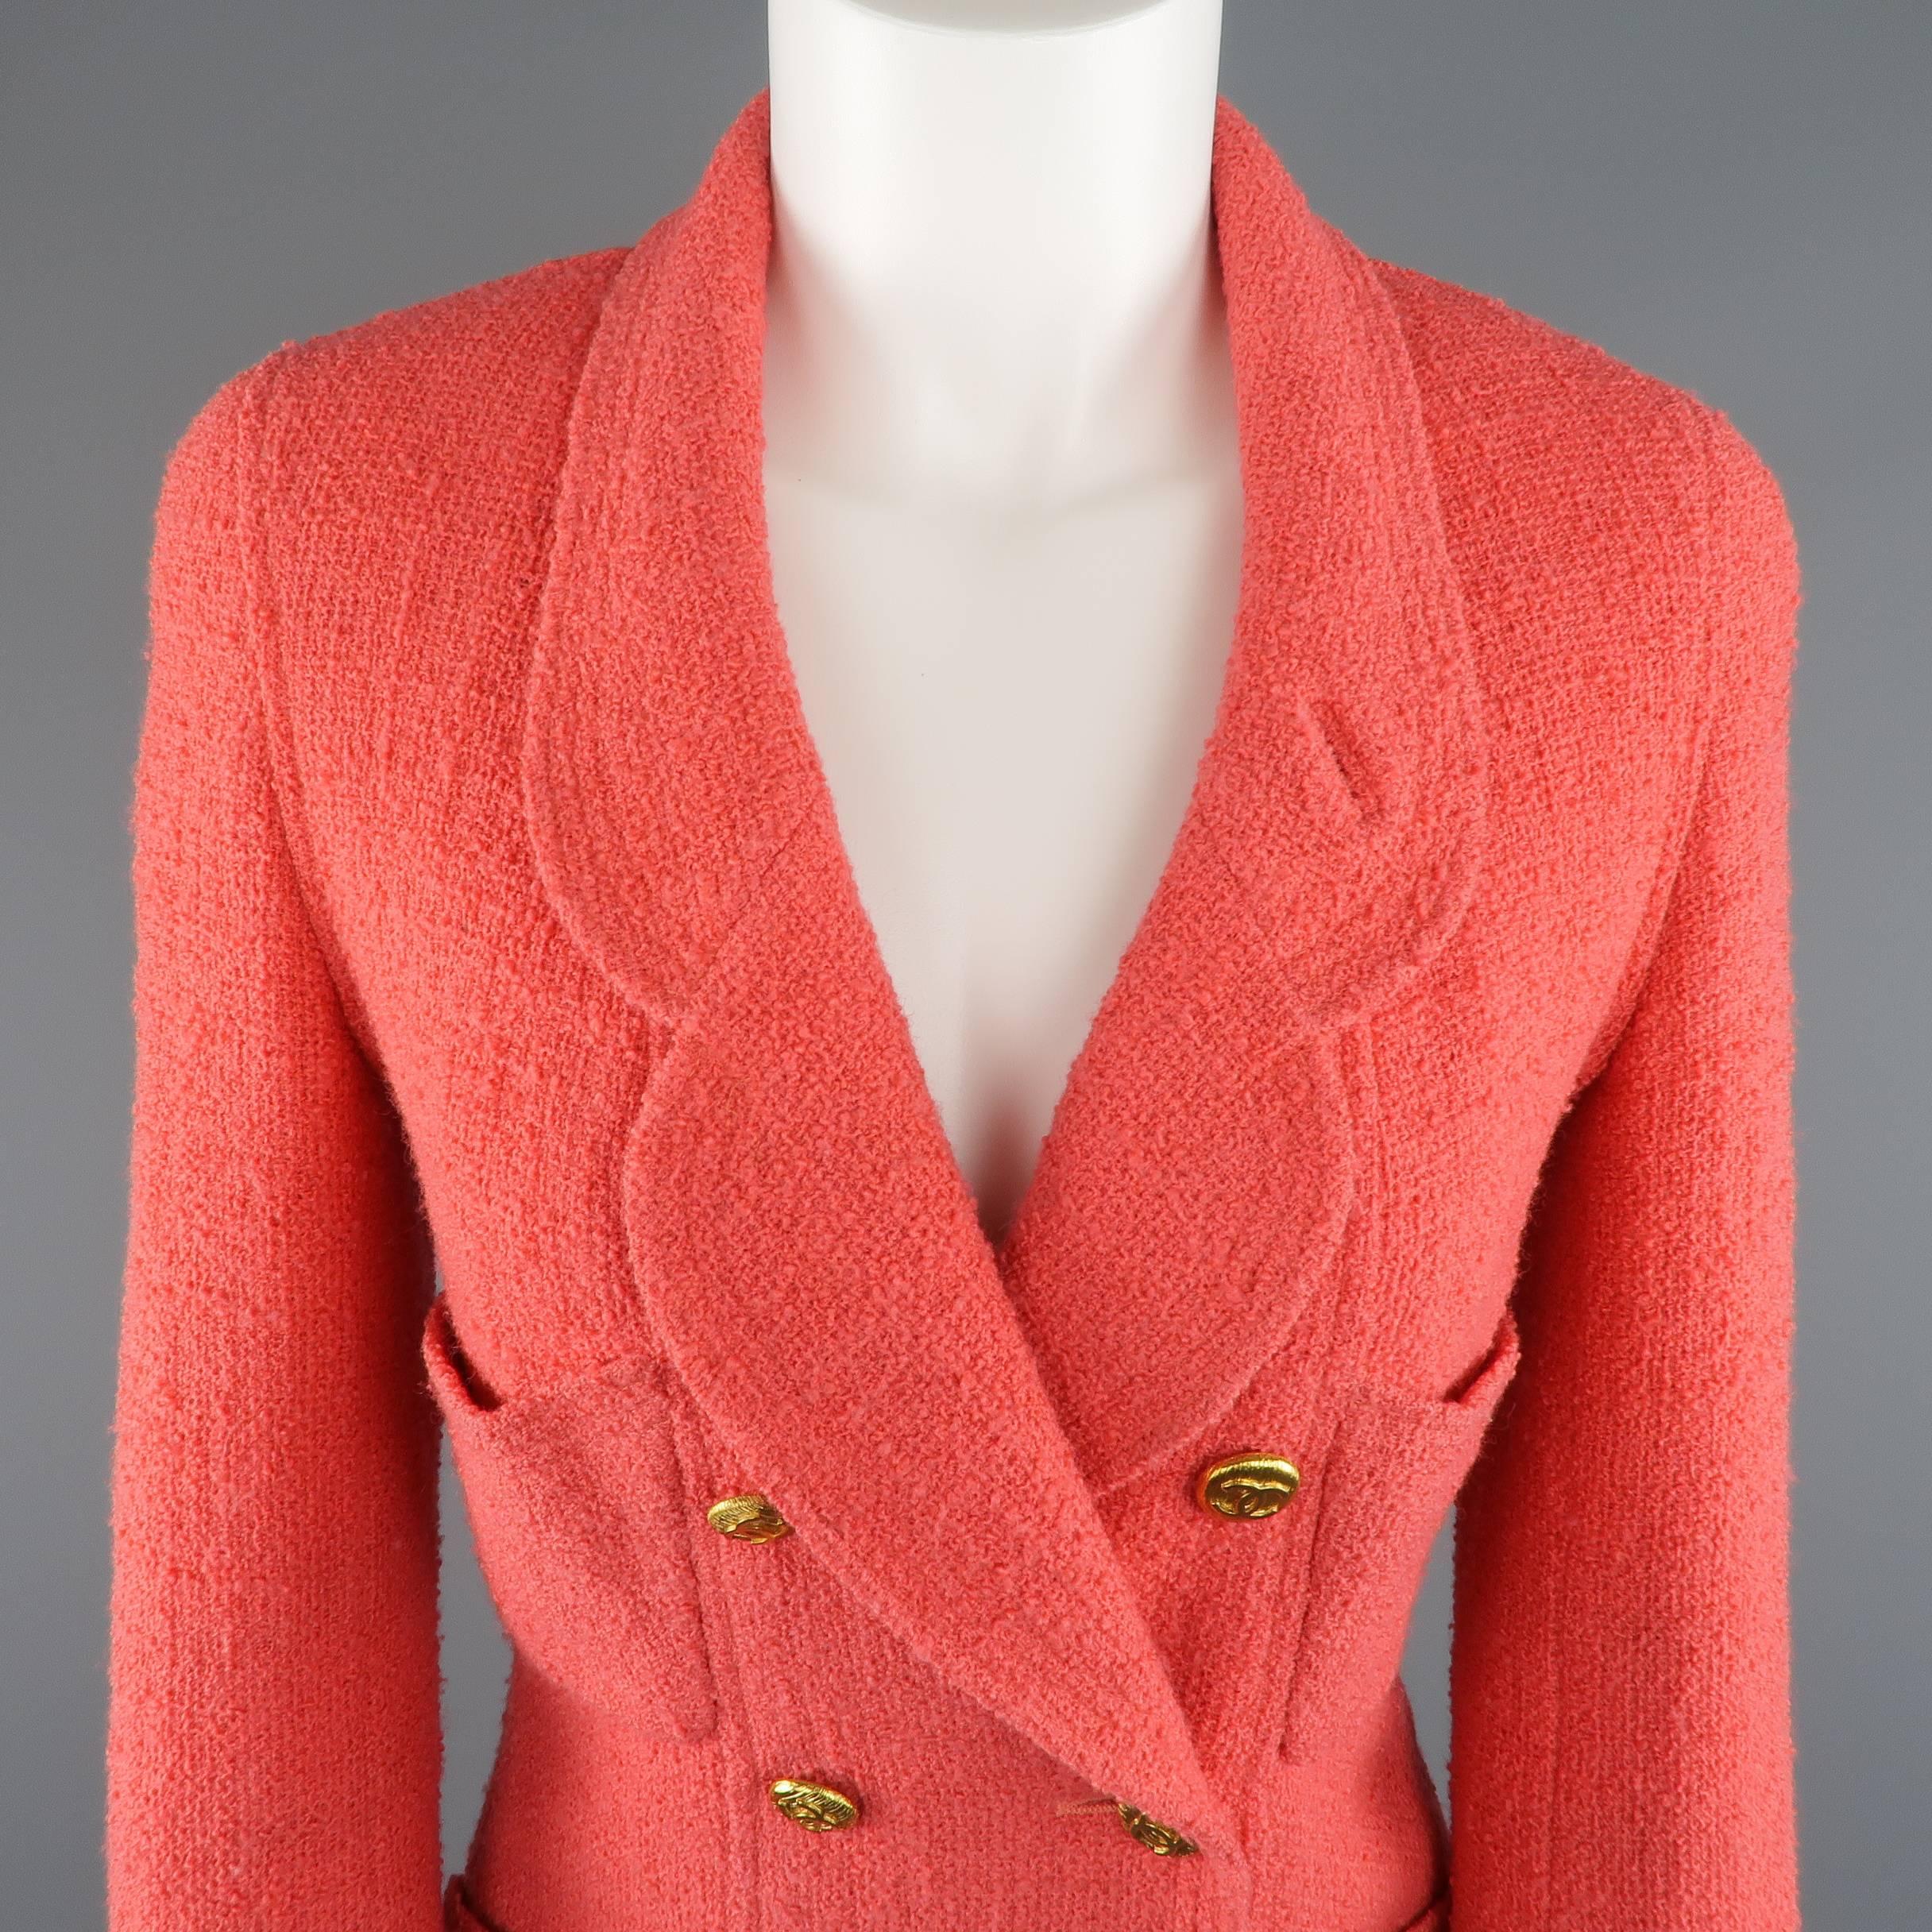 Women's Chanel Jacket - Size 4 Coral Wool Boucle Double Breasted Gold Button Jacket